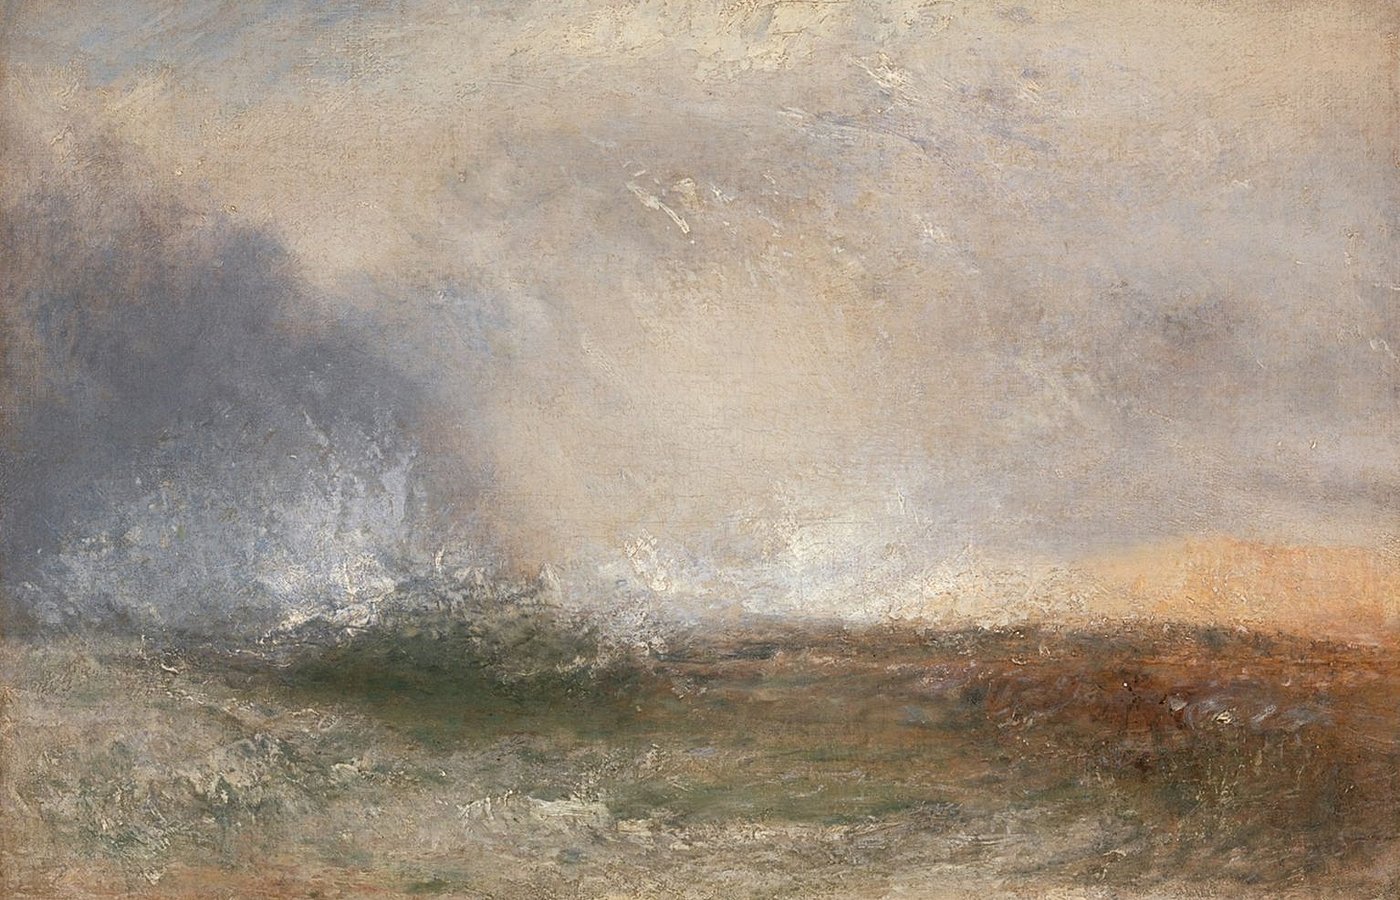  Turner_Stormy Sea Breaking on a Shore 